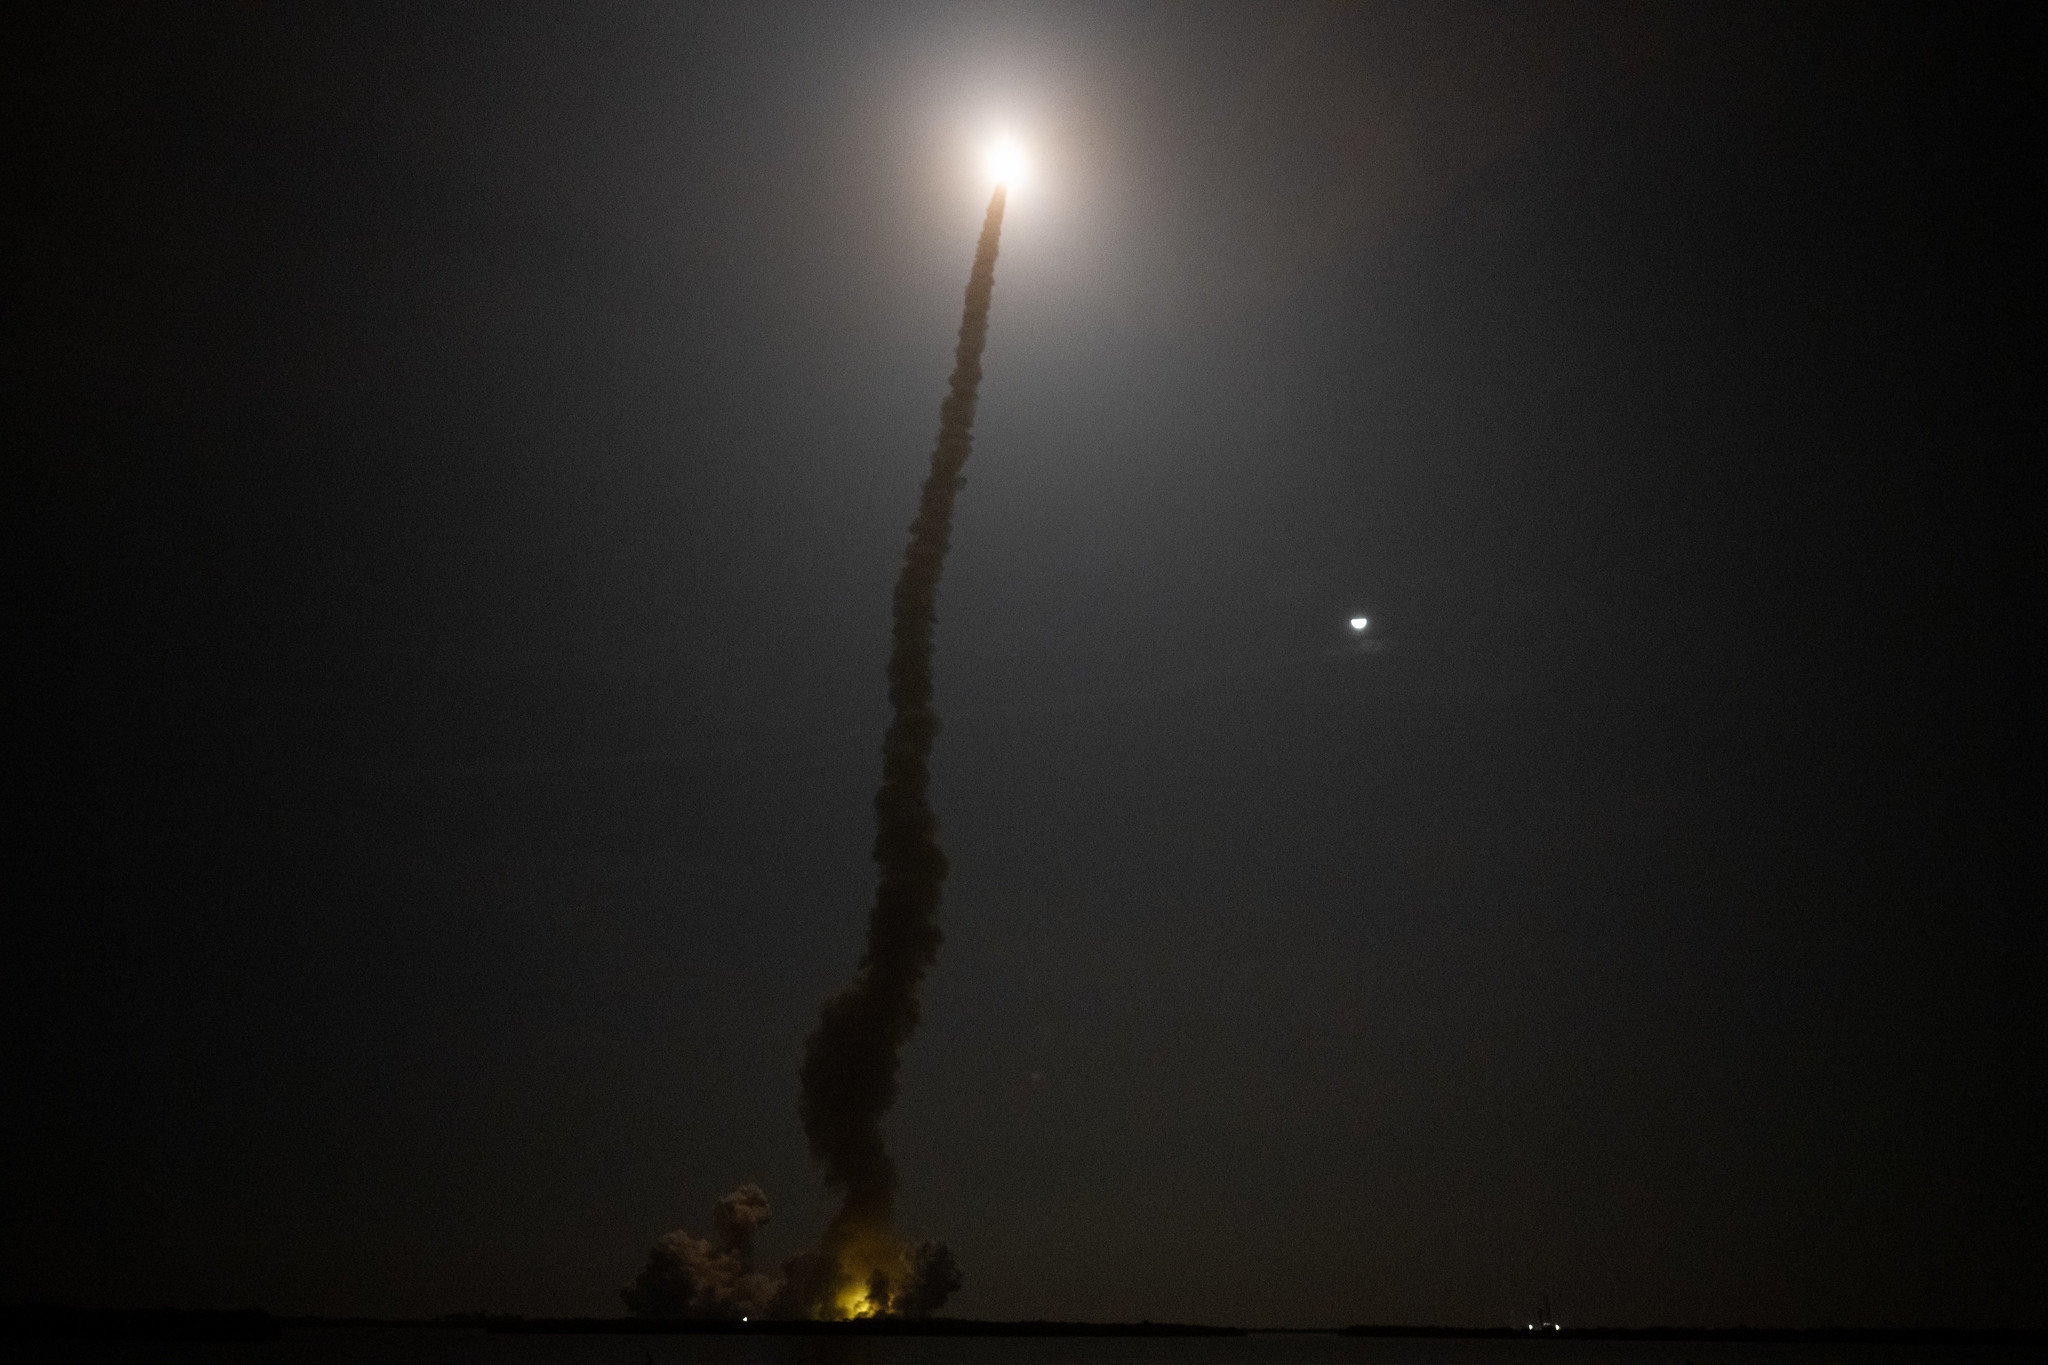 NASA's SLS rocket heads towards deep space as the moon shines beside its smoke trail in the night sky.